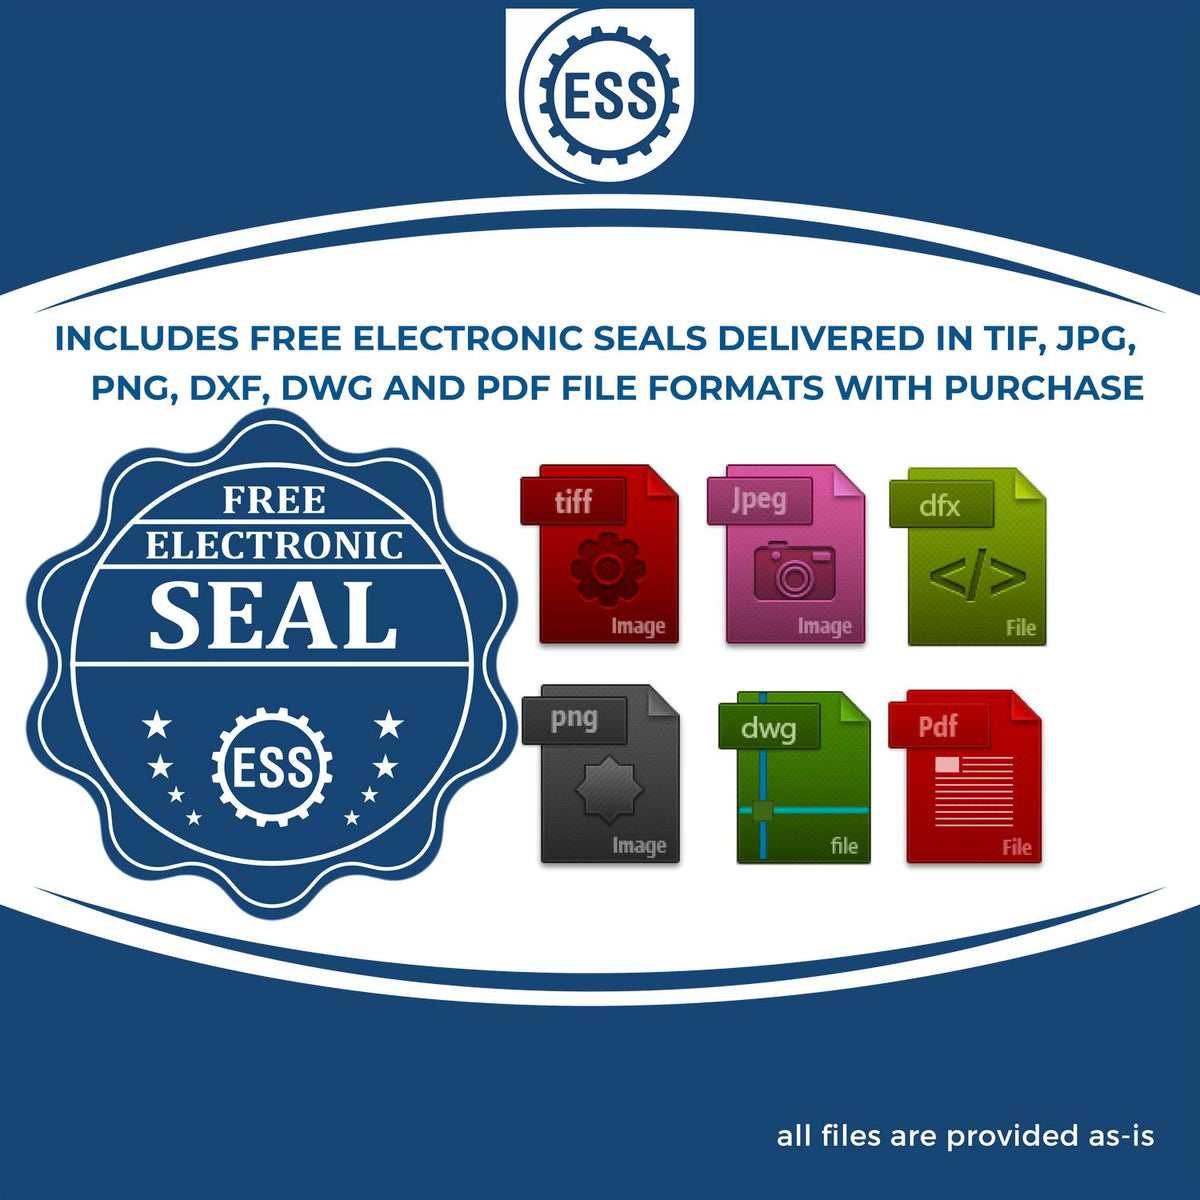 An infographic for the free electronic seal for the MaxLight Premium Pre-Inked South Dakota Rectangular Notarial Stamp illustrating the different file type icons such as DXF, DWG, TIF, JPG and PNG.